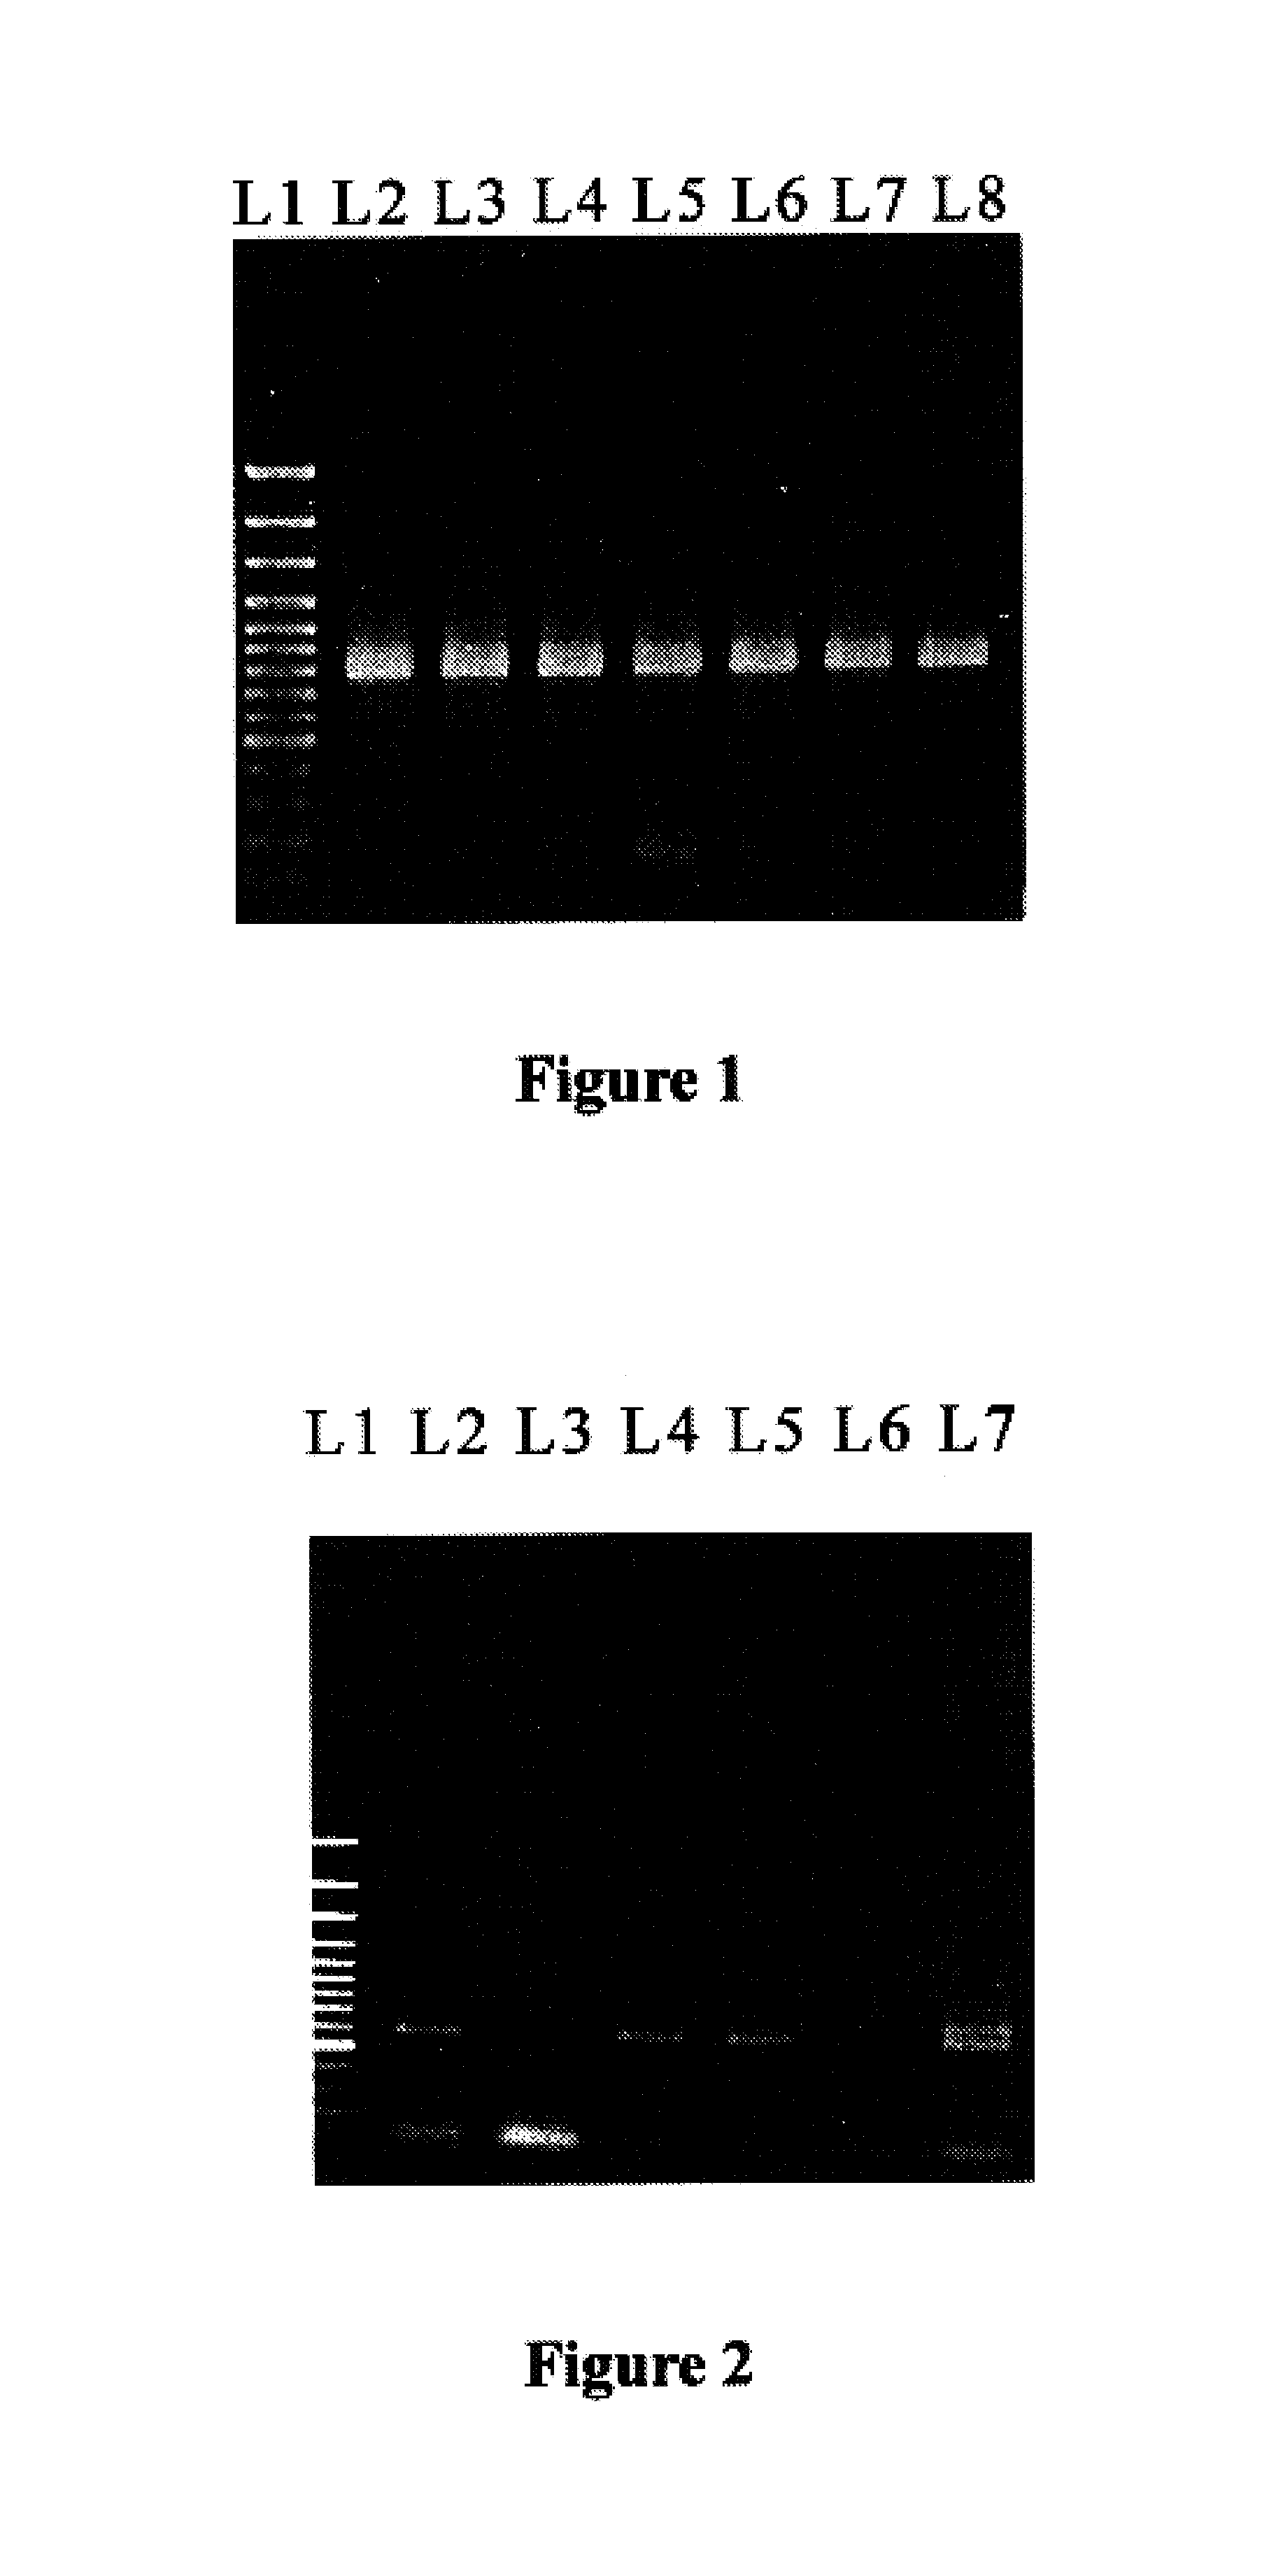 Method of marking solid or liquid substances with nucleic acid for anti-counterfeiting and authentication